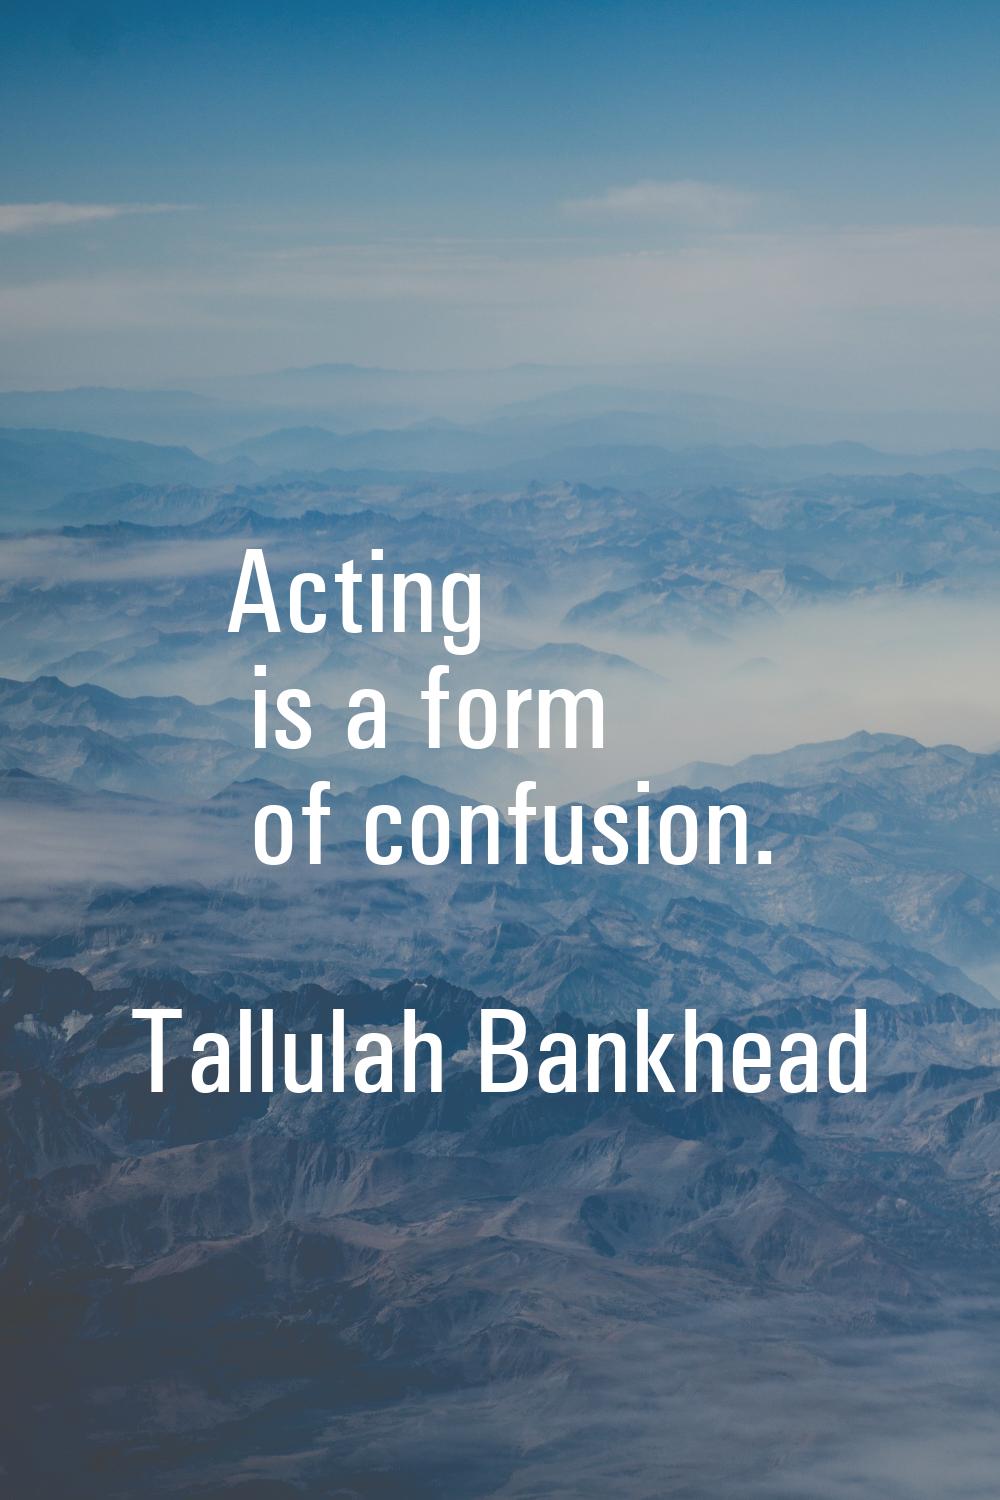 Acting is a form of confusion.